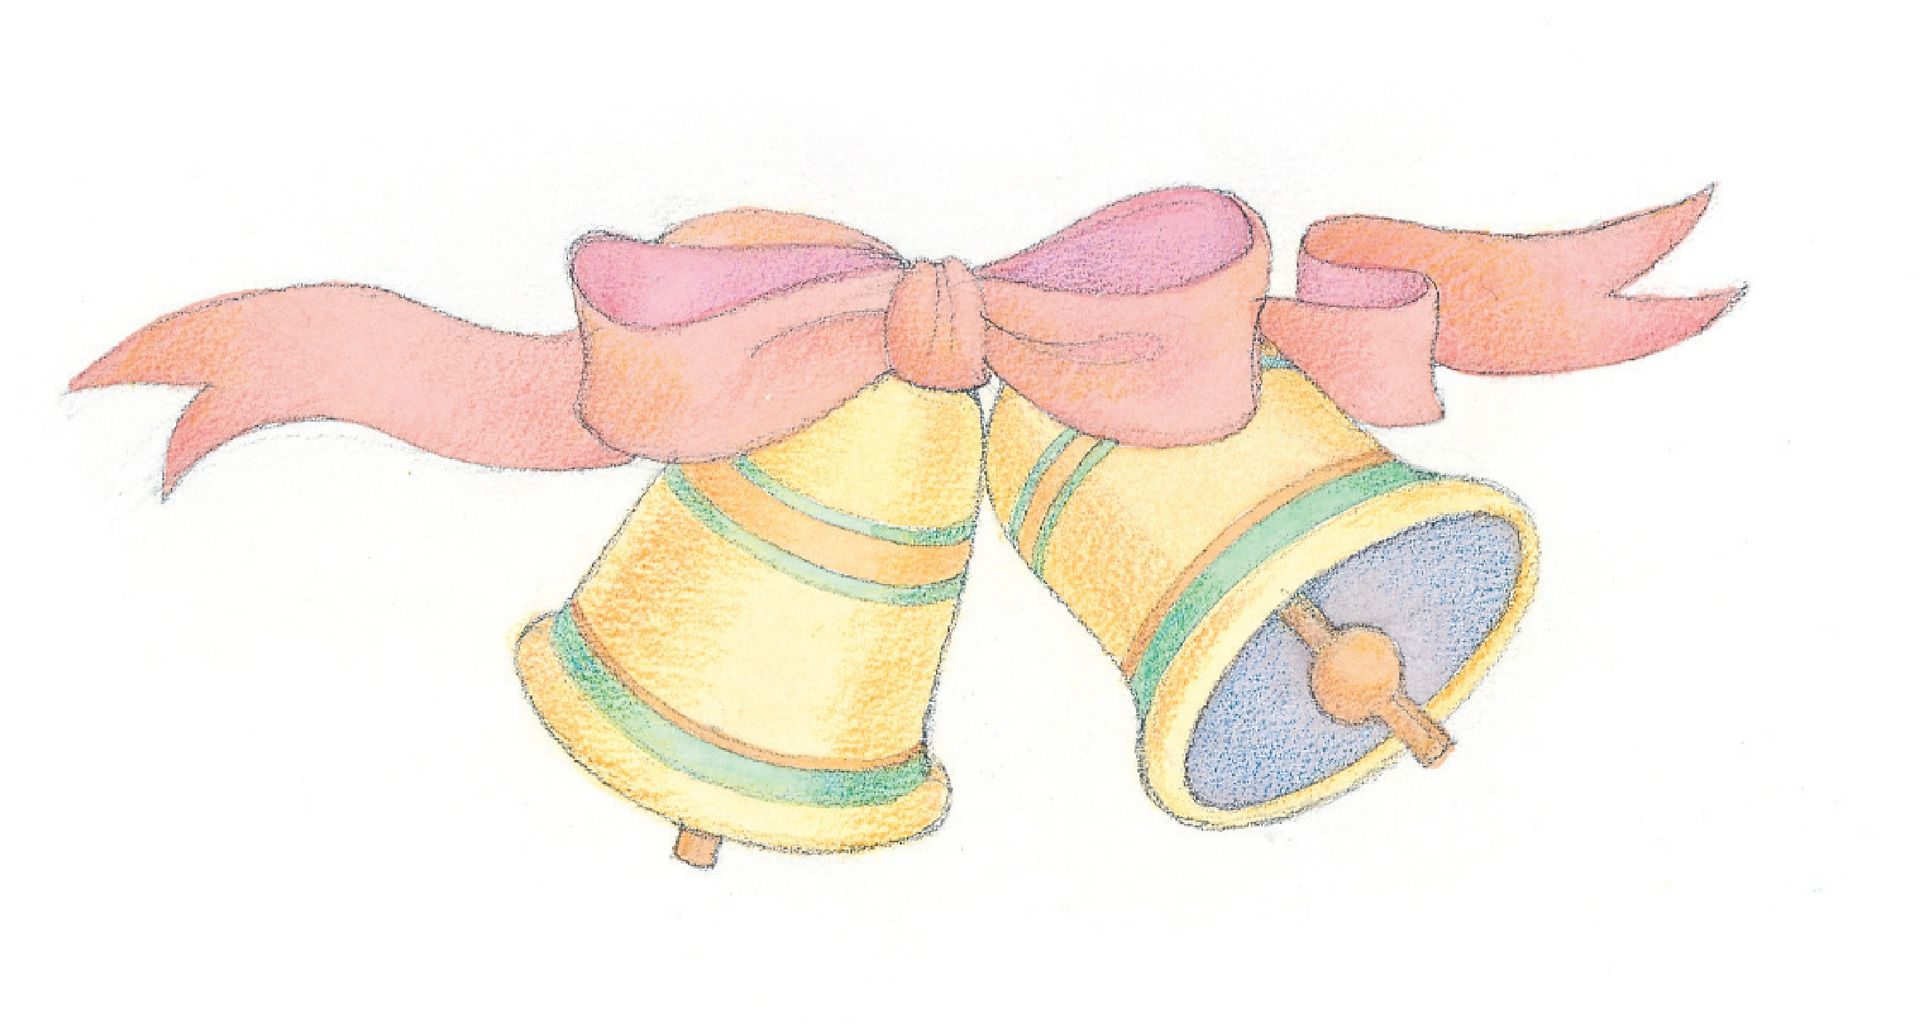 Two Christmas bells ringing. From the Children’s Songbook, page 54, “Christmas Bells”; watercolor illustration by Phyllis Luch.